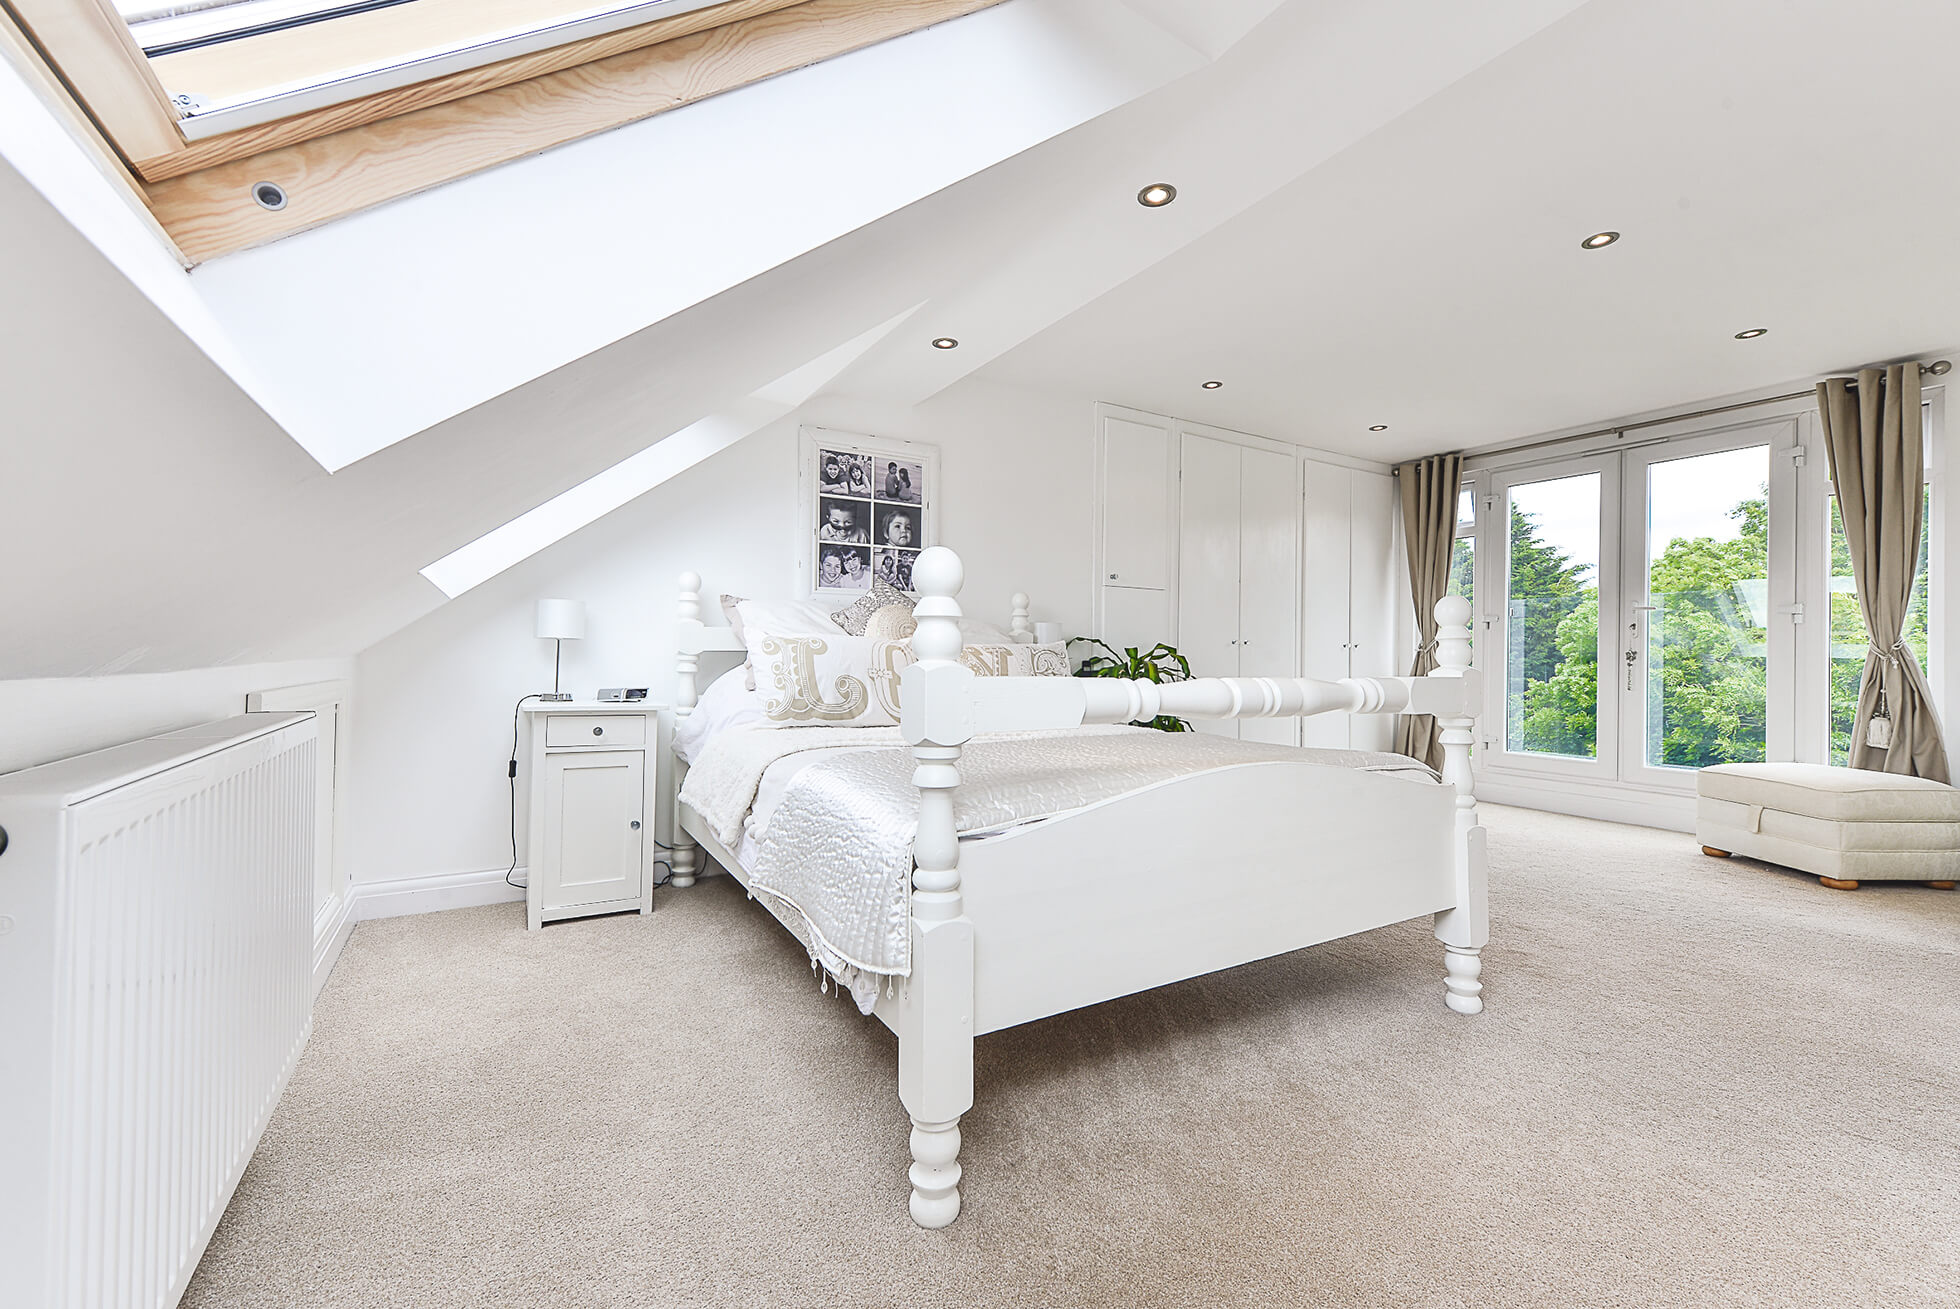 Do you have a question about converting your Loft in Moor Park? Here are the most popular questions asked by our clients.